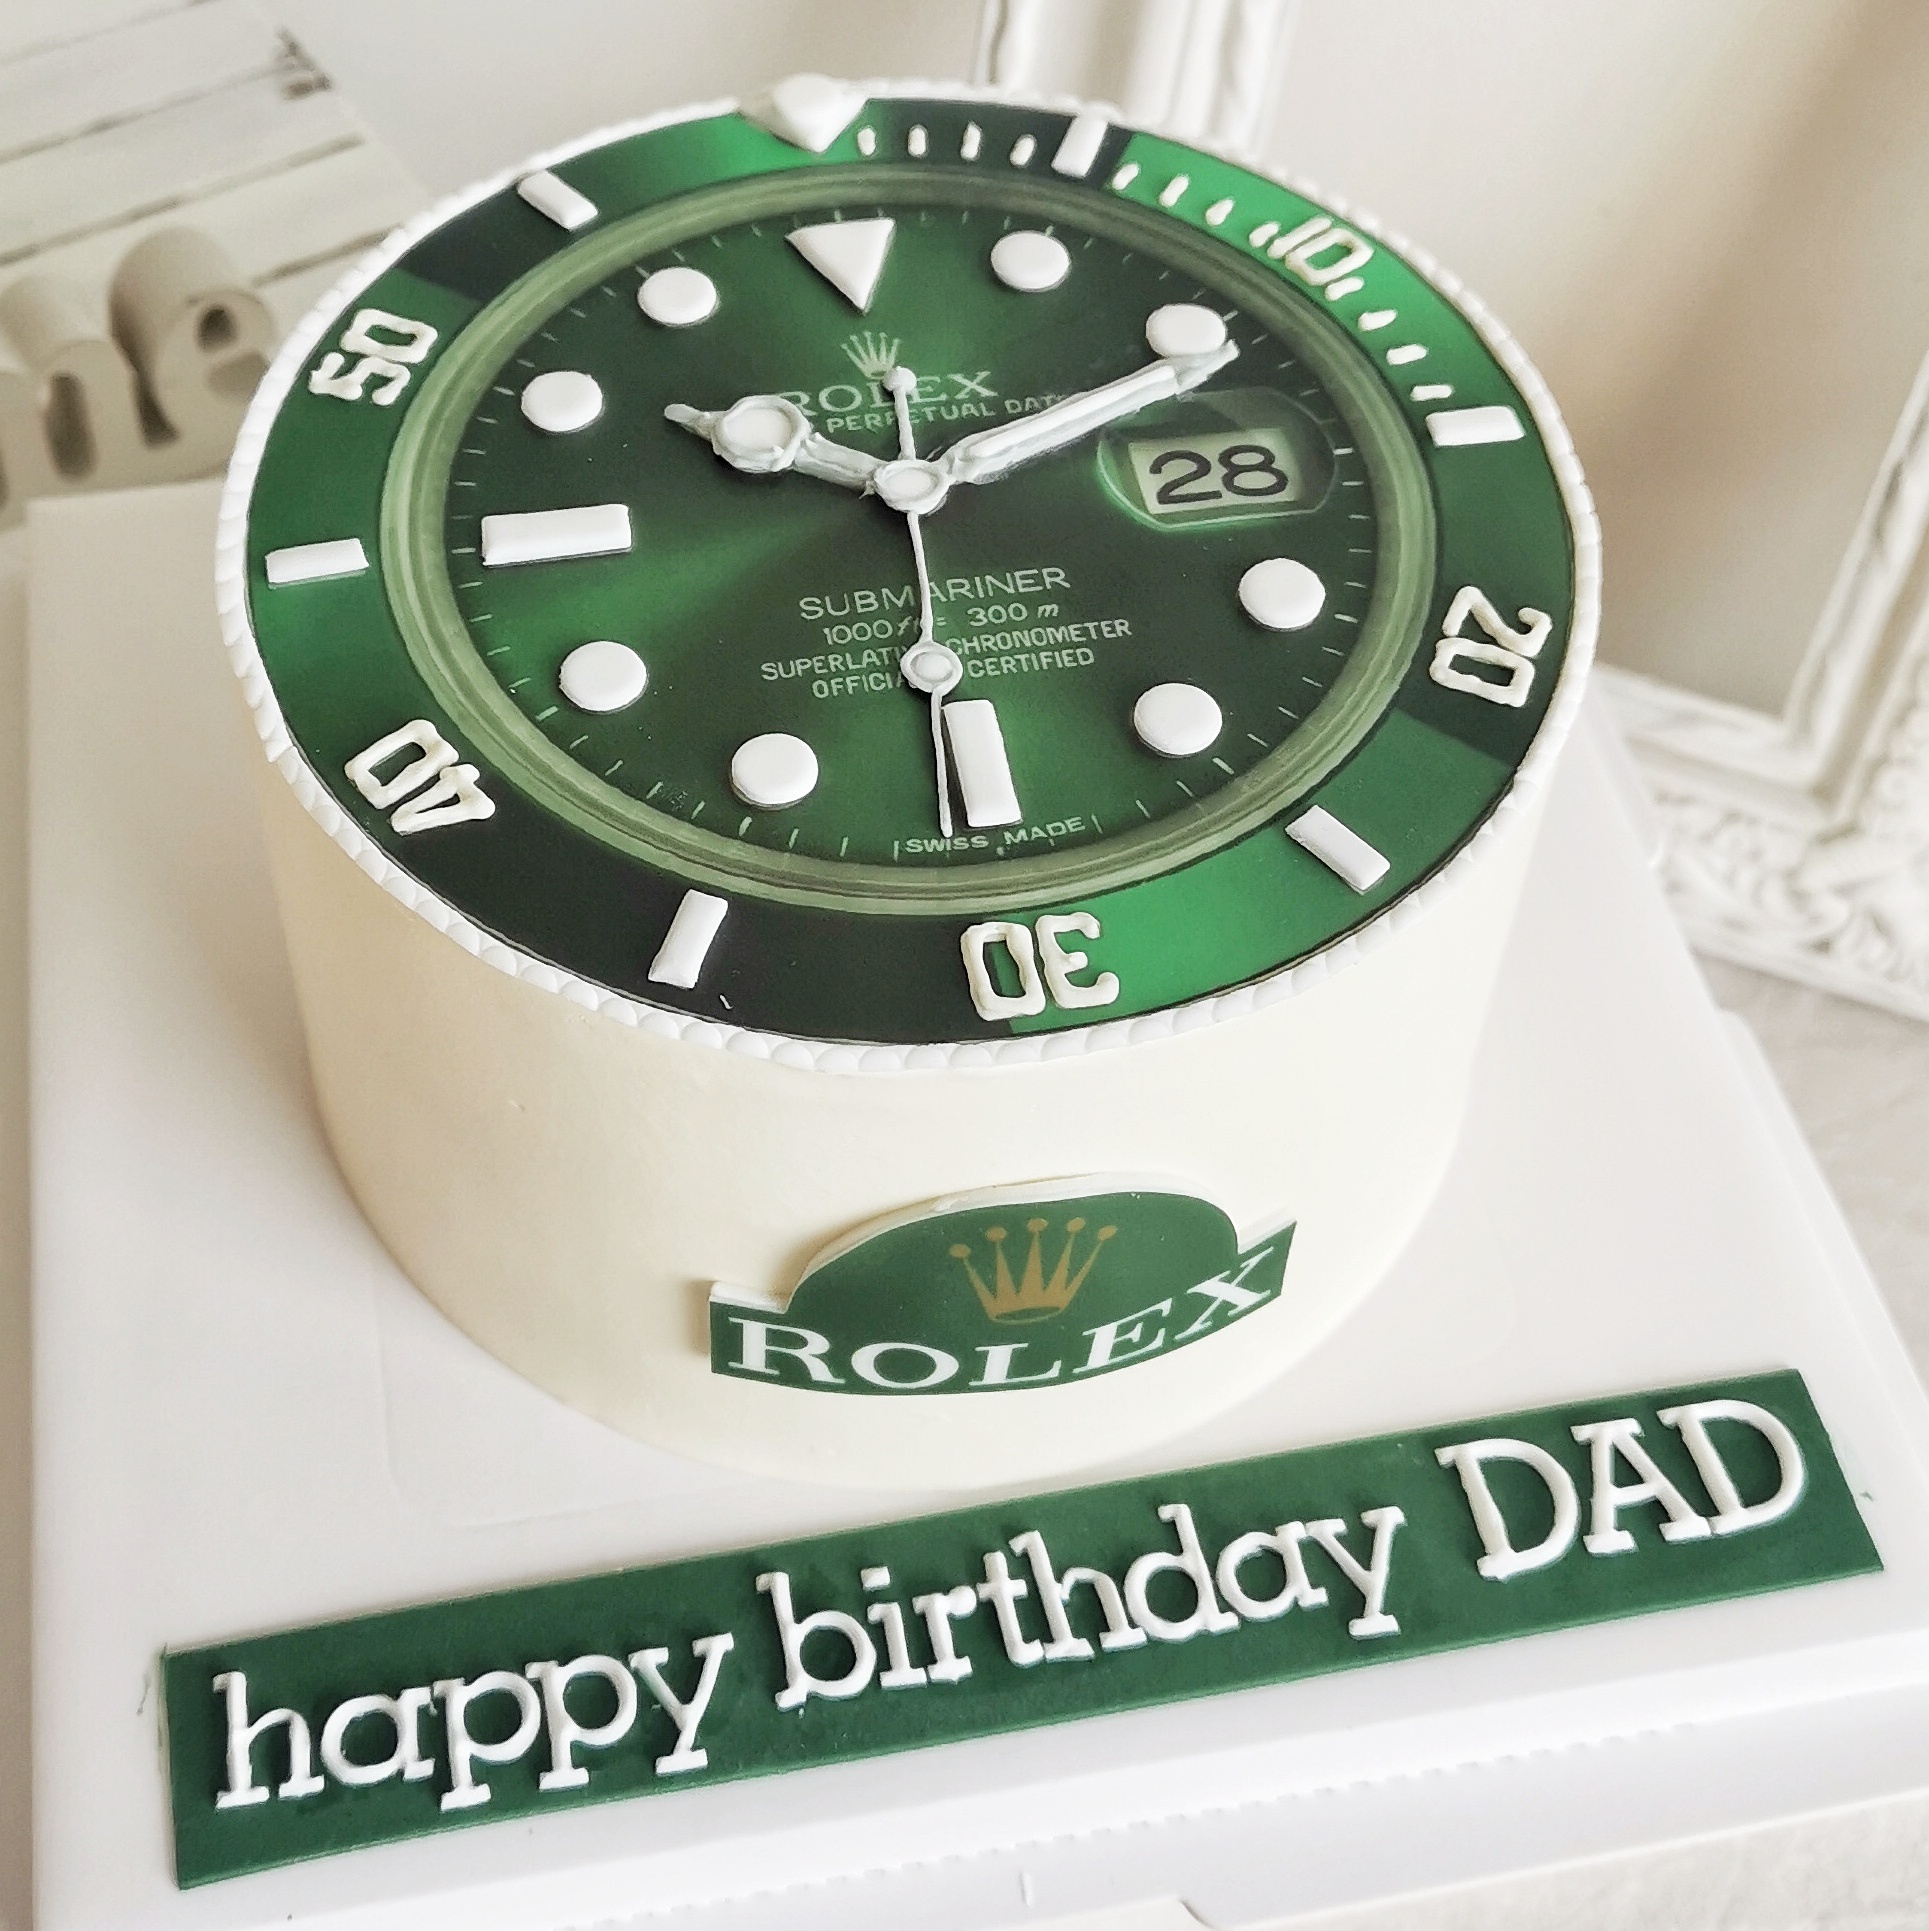 Rolex and Box cake | Birthday cakes for men, Box cake, Cakes for men